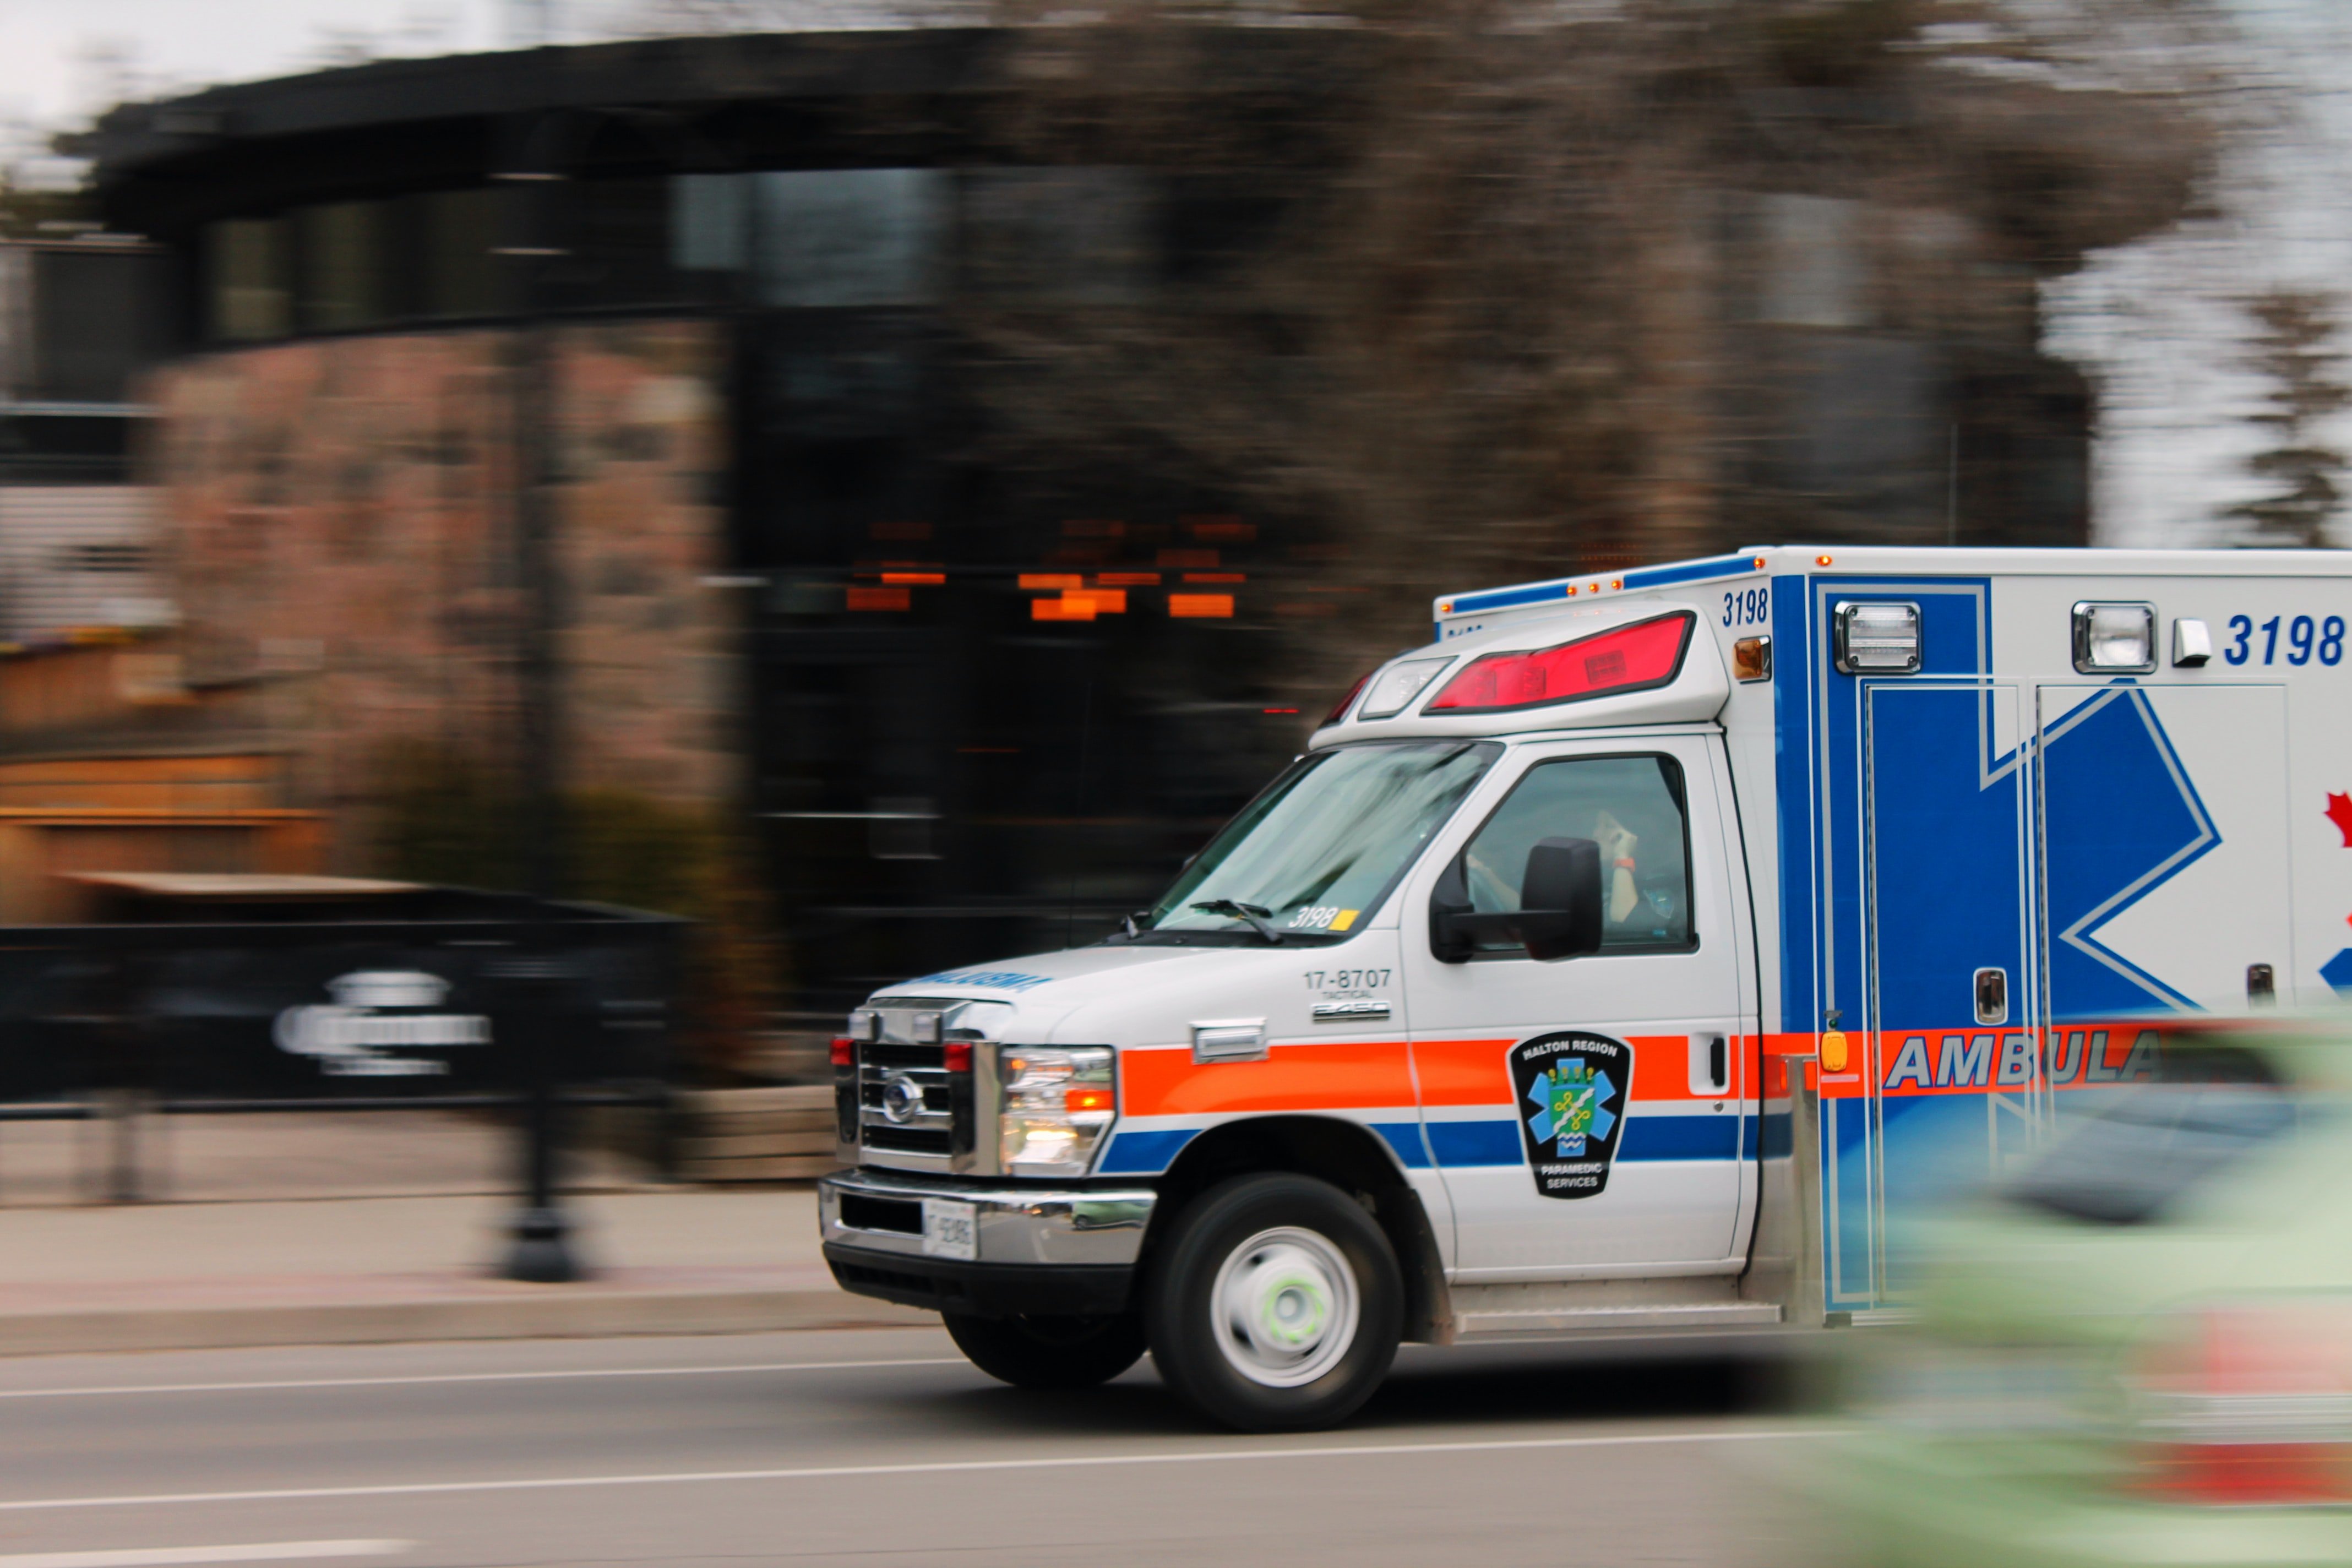 Doris was rushed to the hospital in an ambulance. | Source: Unsplash